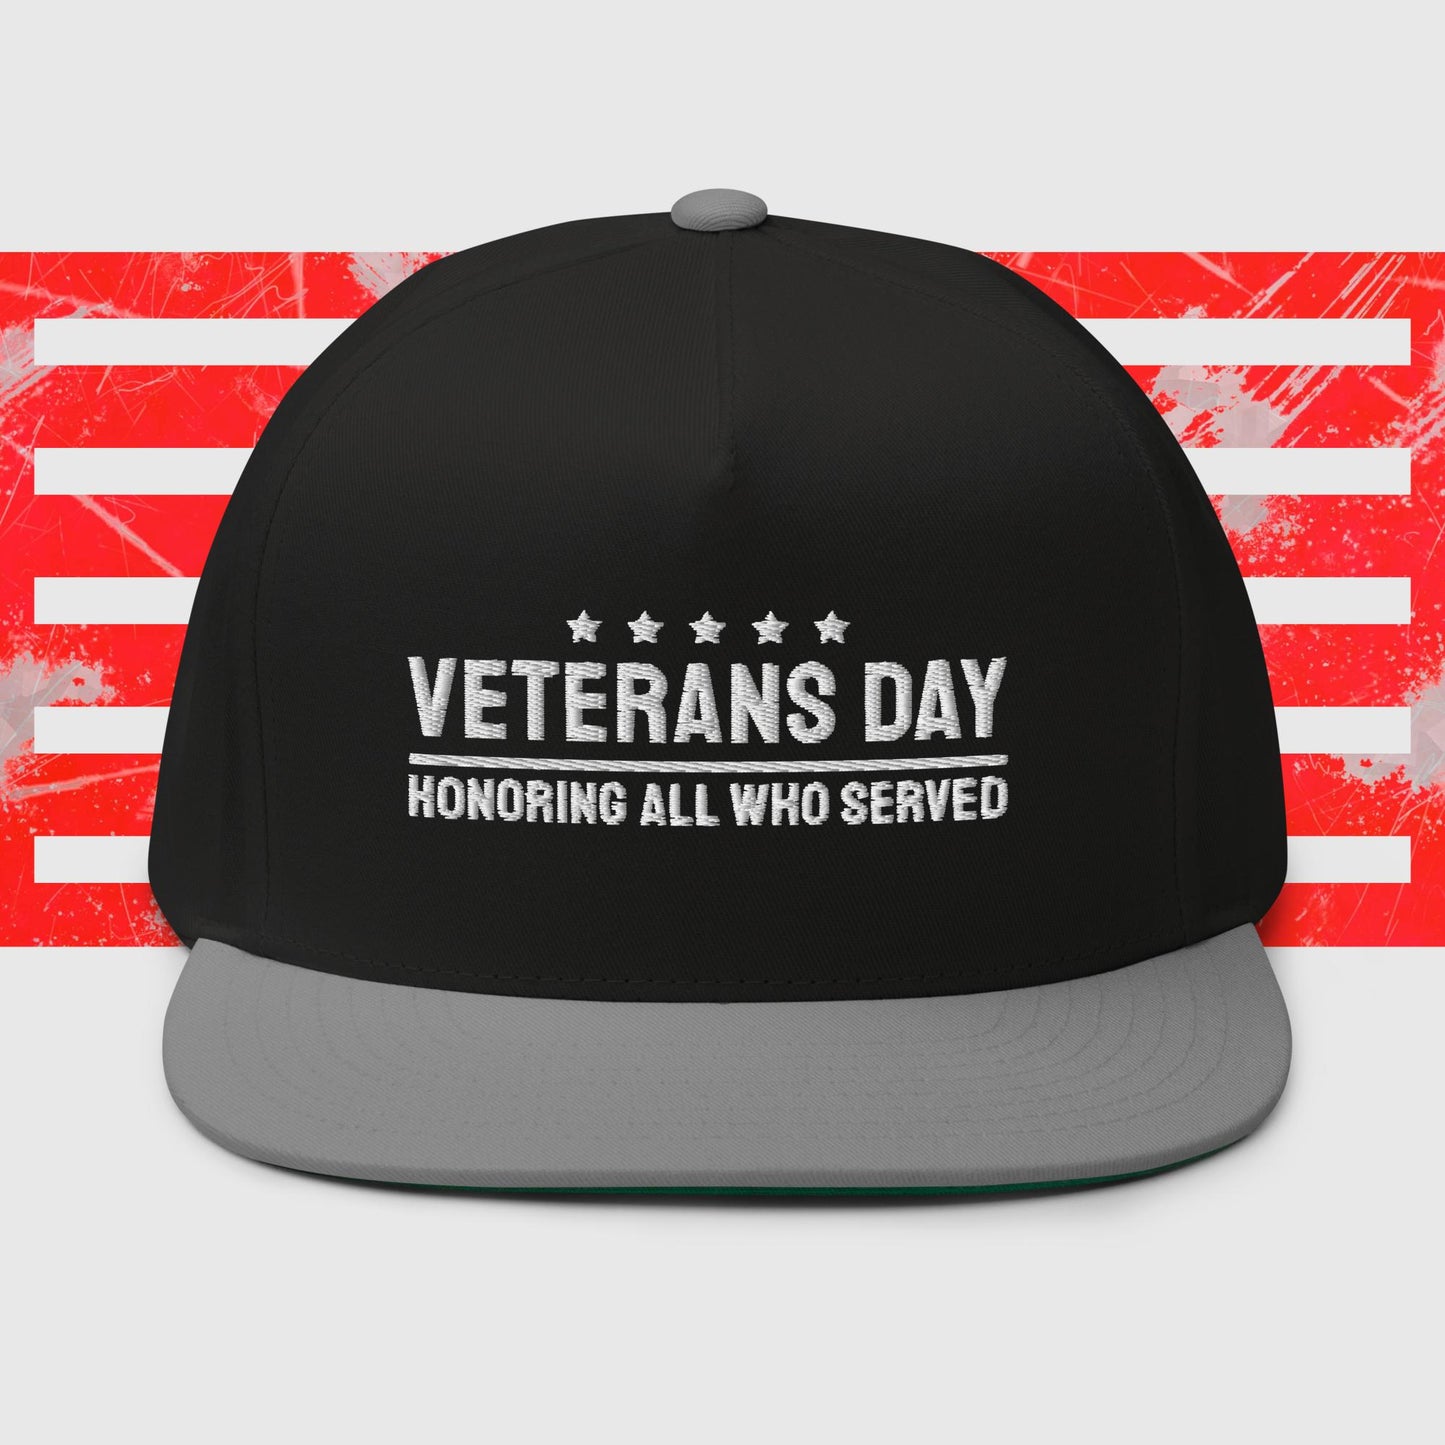 PATRIOTIC CAP VETERANS DAY HONORING ALL WHO SERVED BLACK GREY FRONT - www.firstamericanstore.com